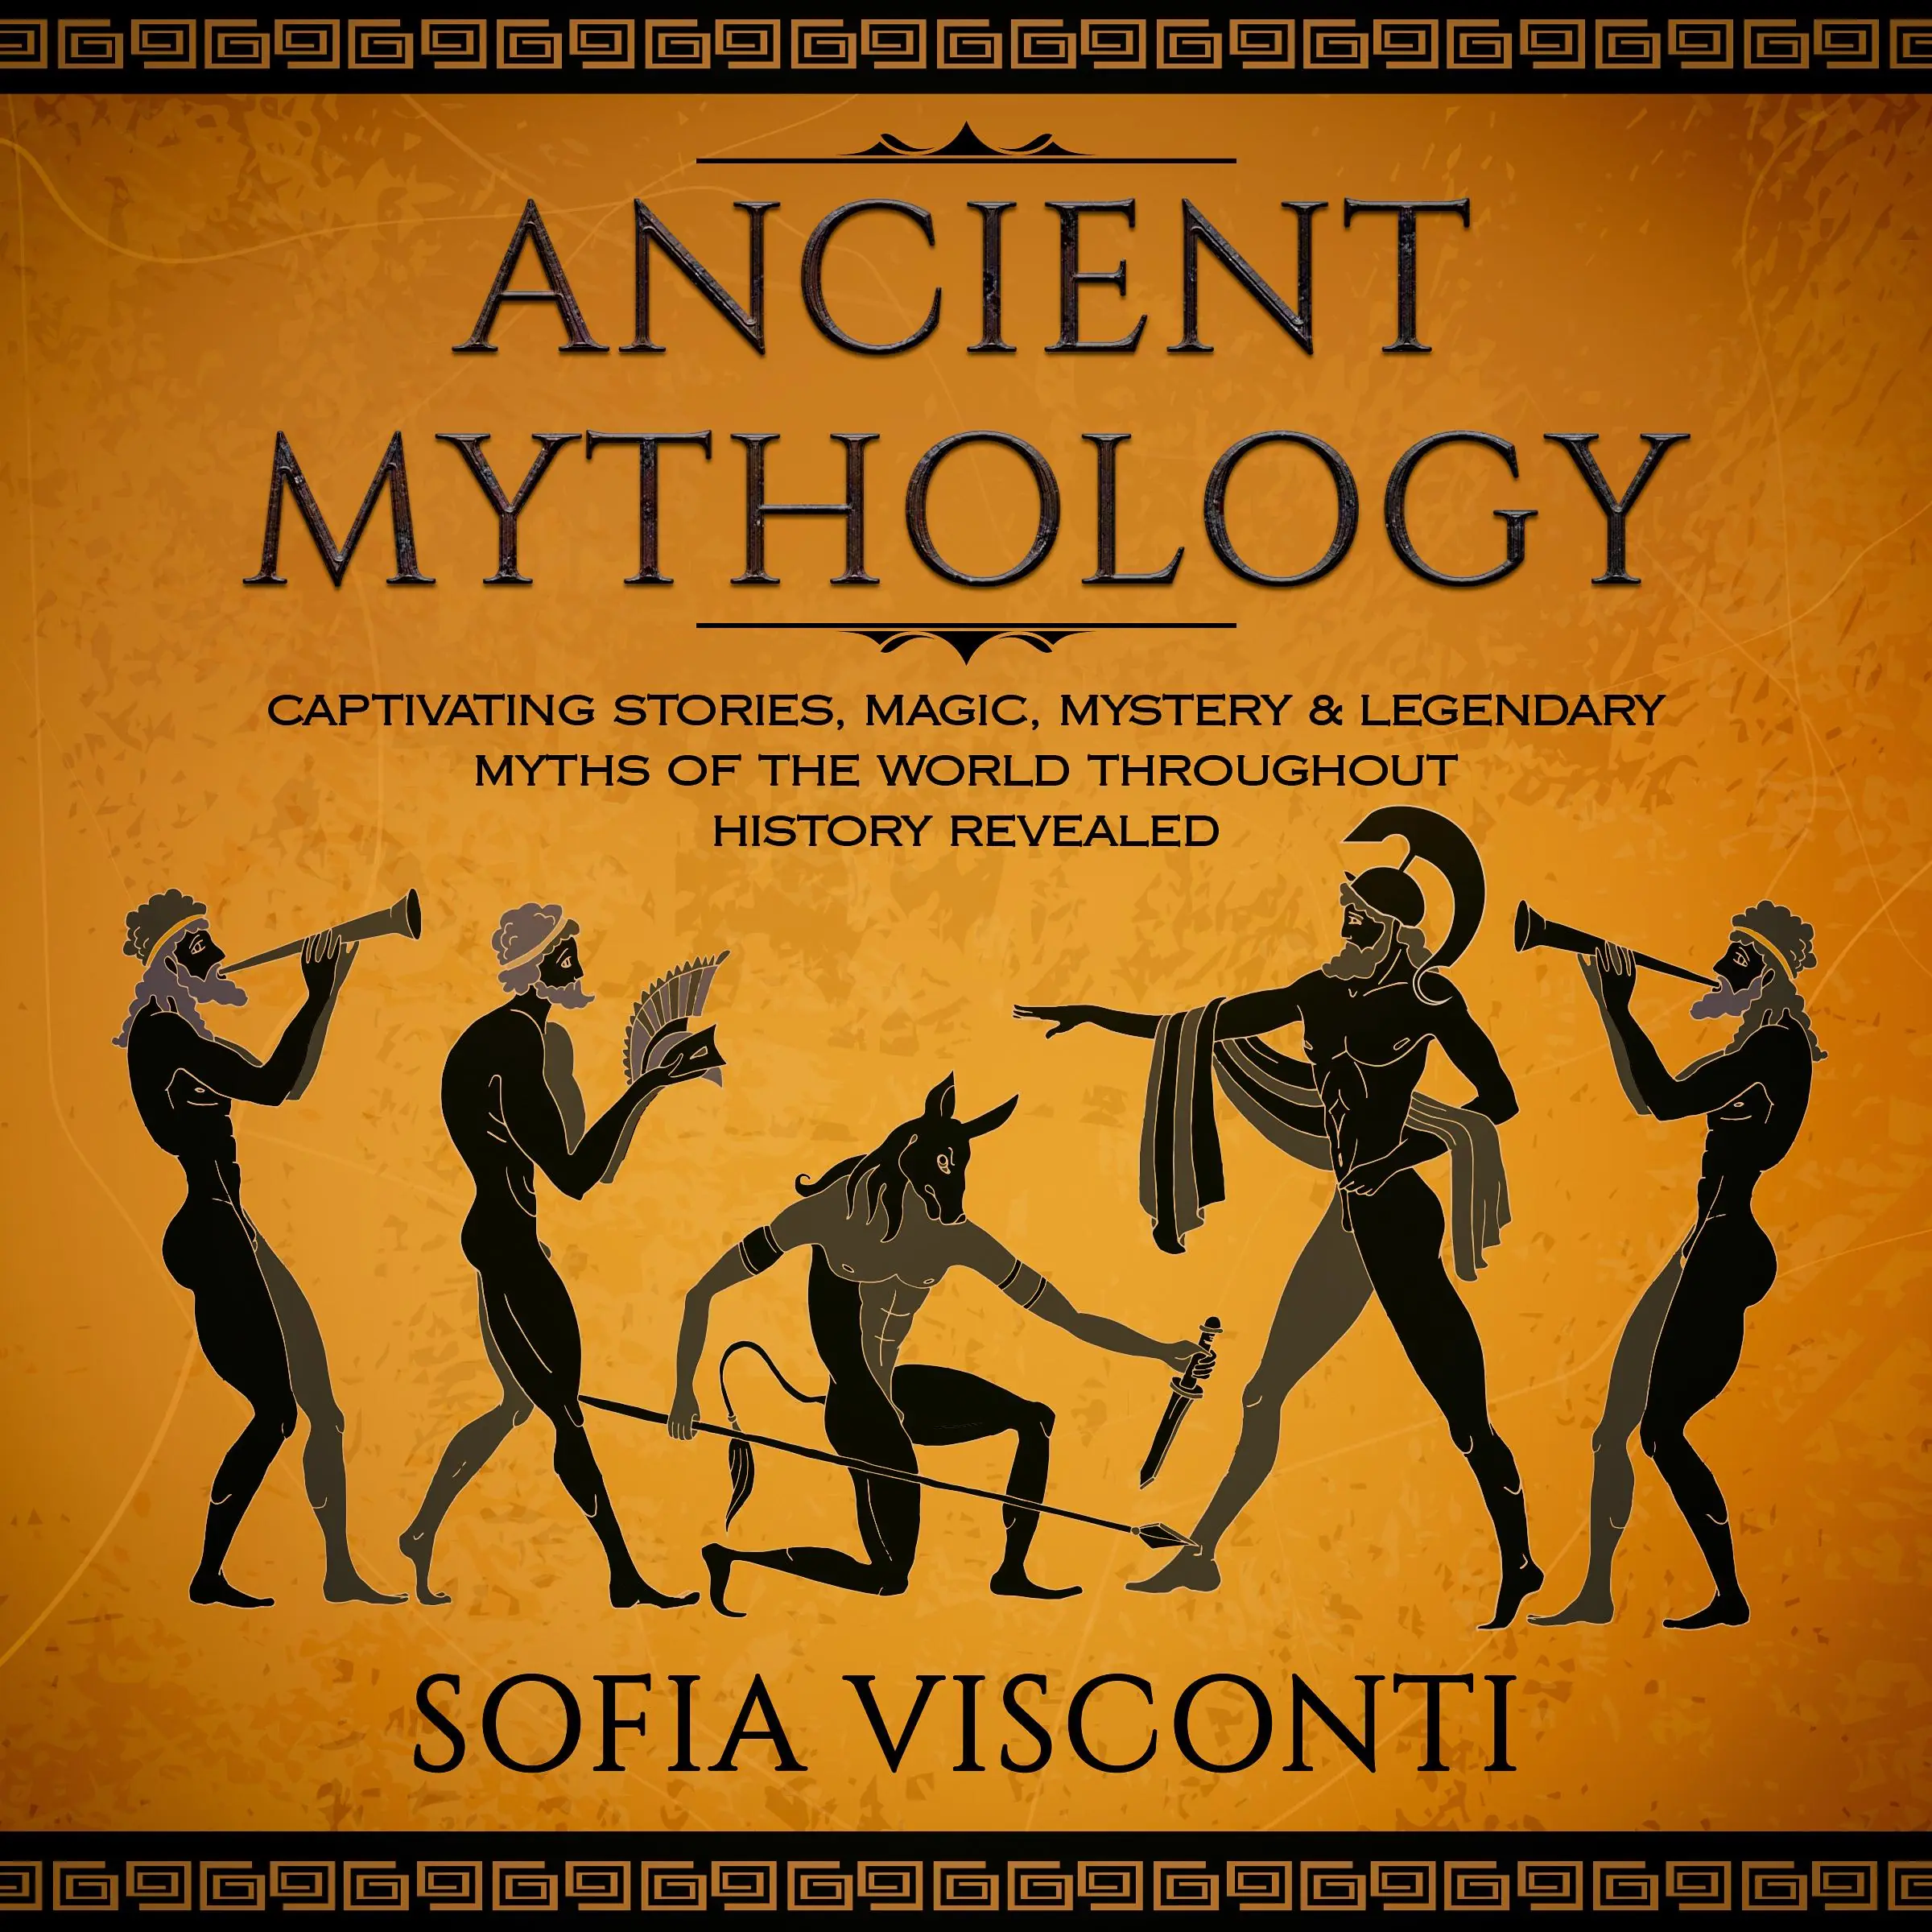 Ancient Mythology: Captivating Stories, Magic, Mystery & Legendary Myths of The World Throughout History Revealed by Sofia Visconti Audiobook